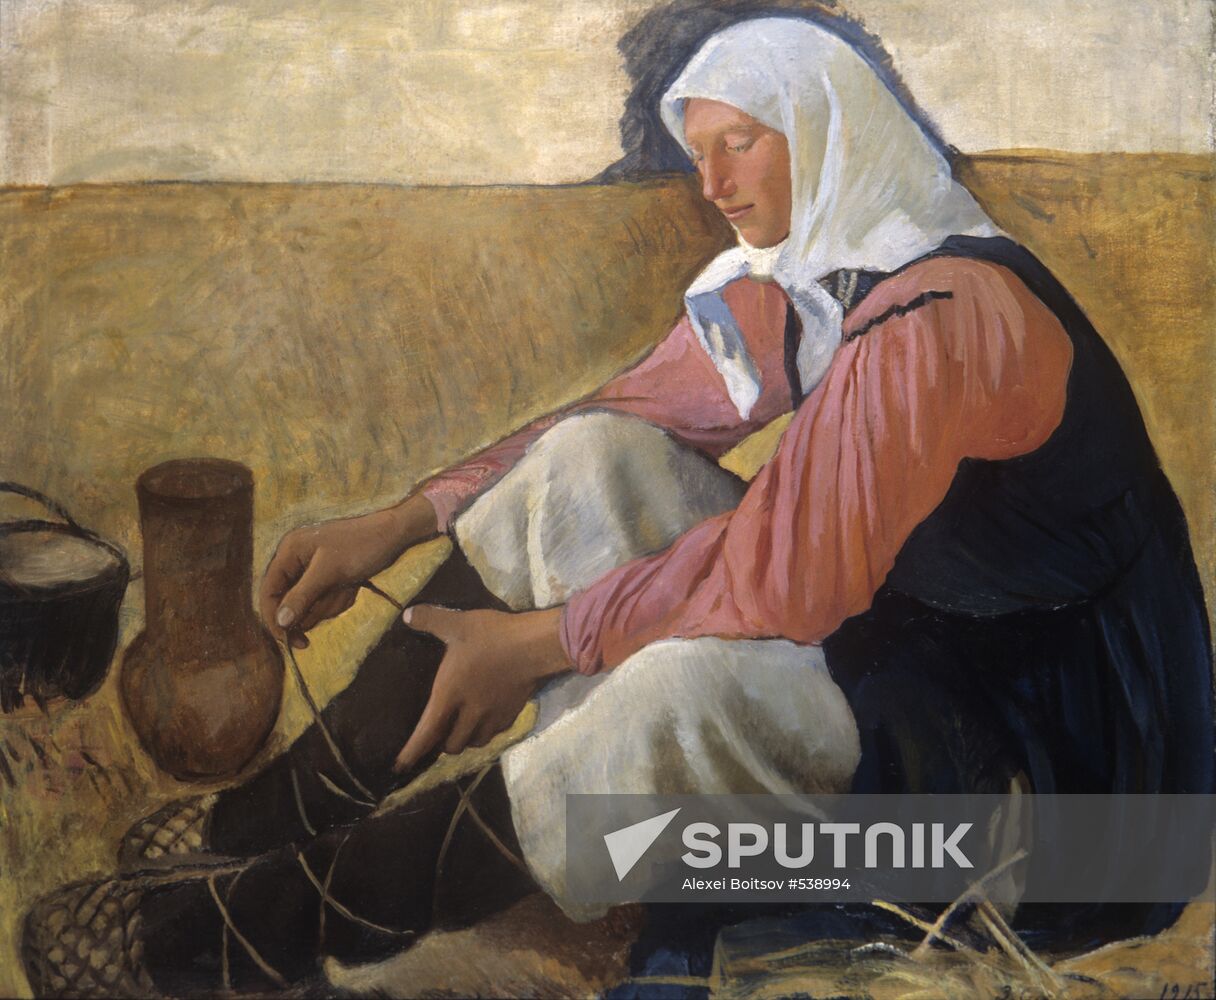 Reproduction of "Peasant Putting Her Shoes" painting